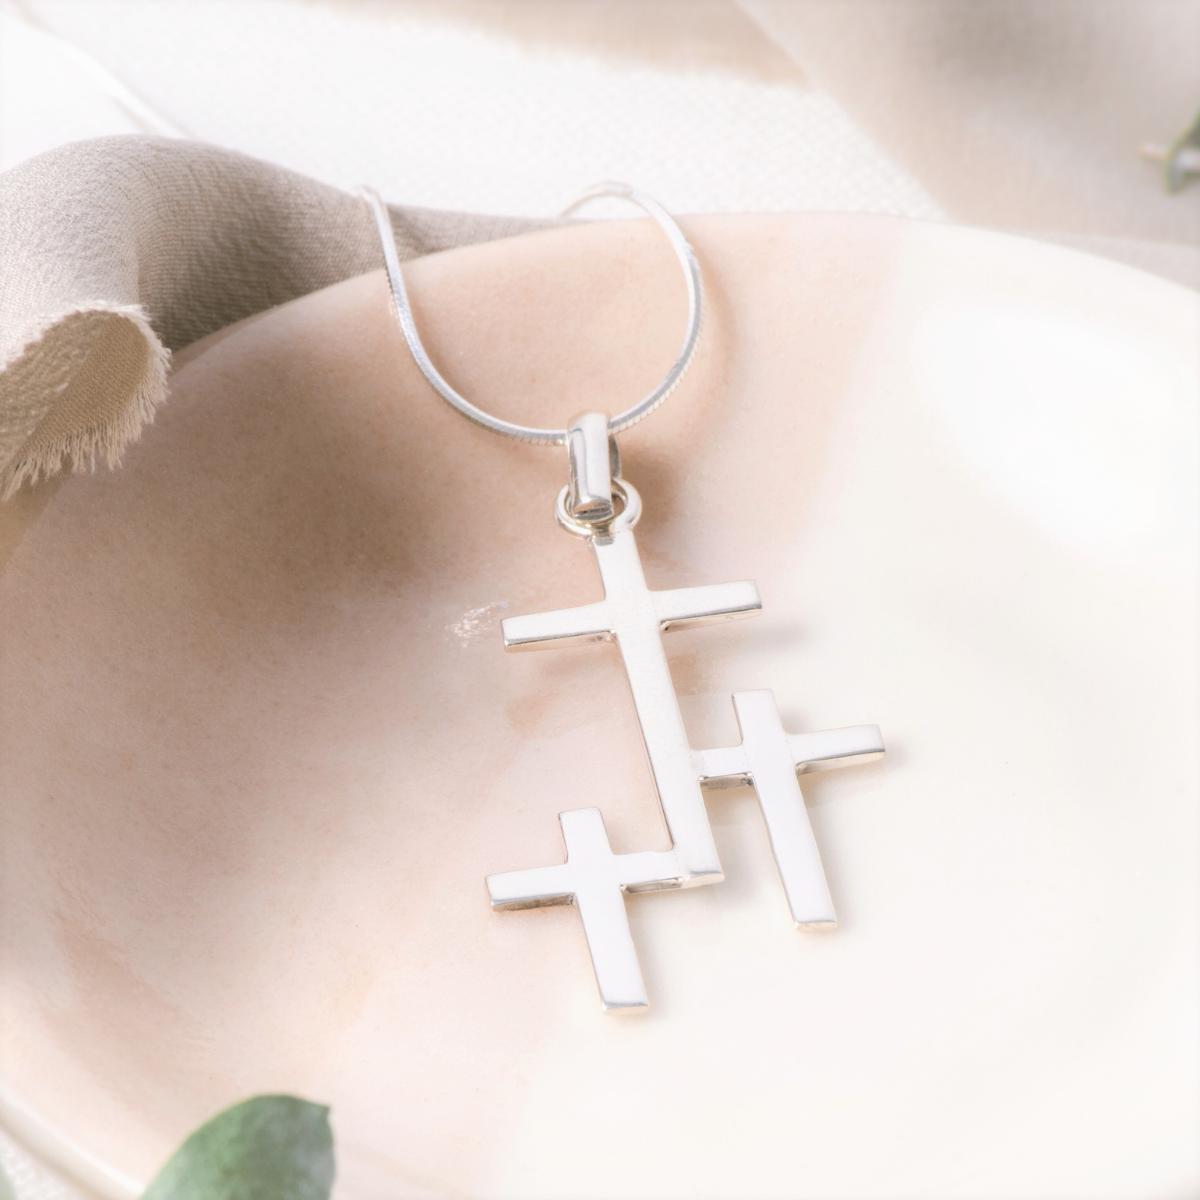 Buy Silver Plated Cross Charm Men Necklace@ Best Price